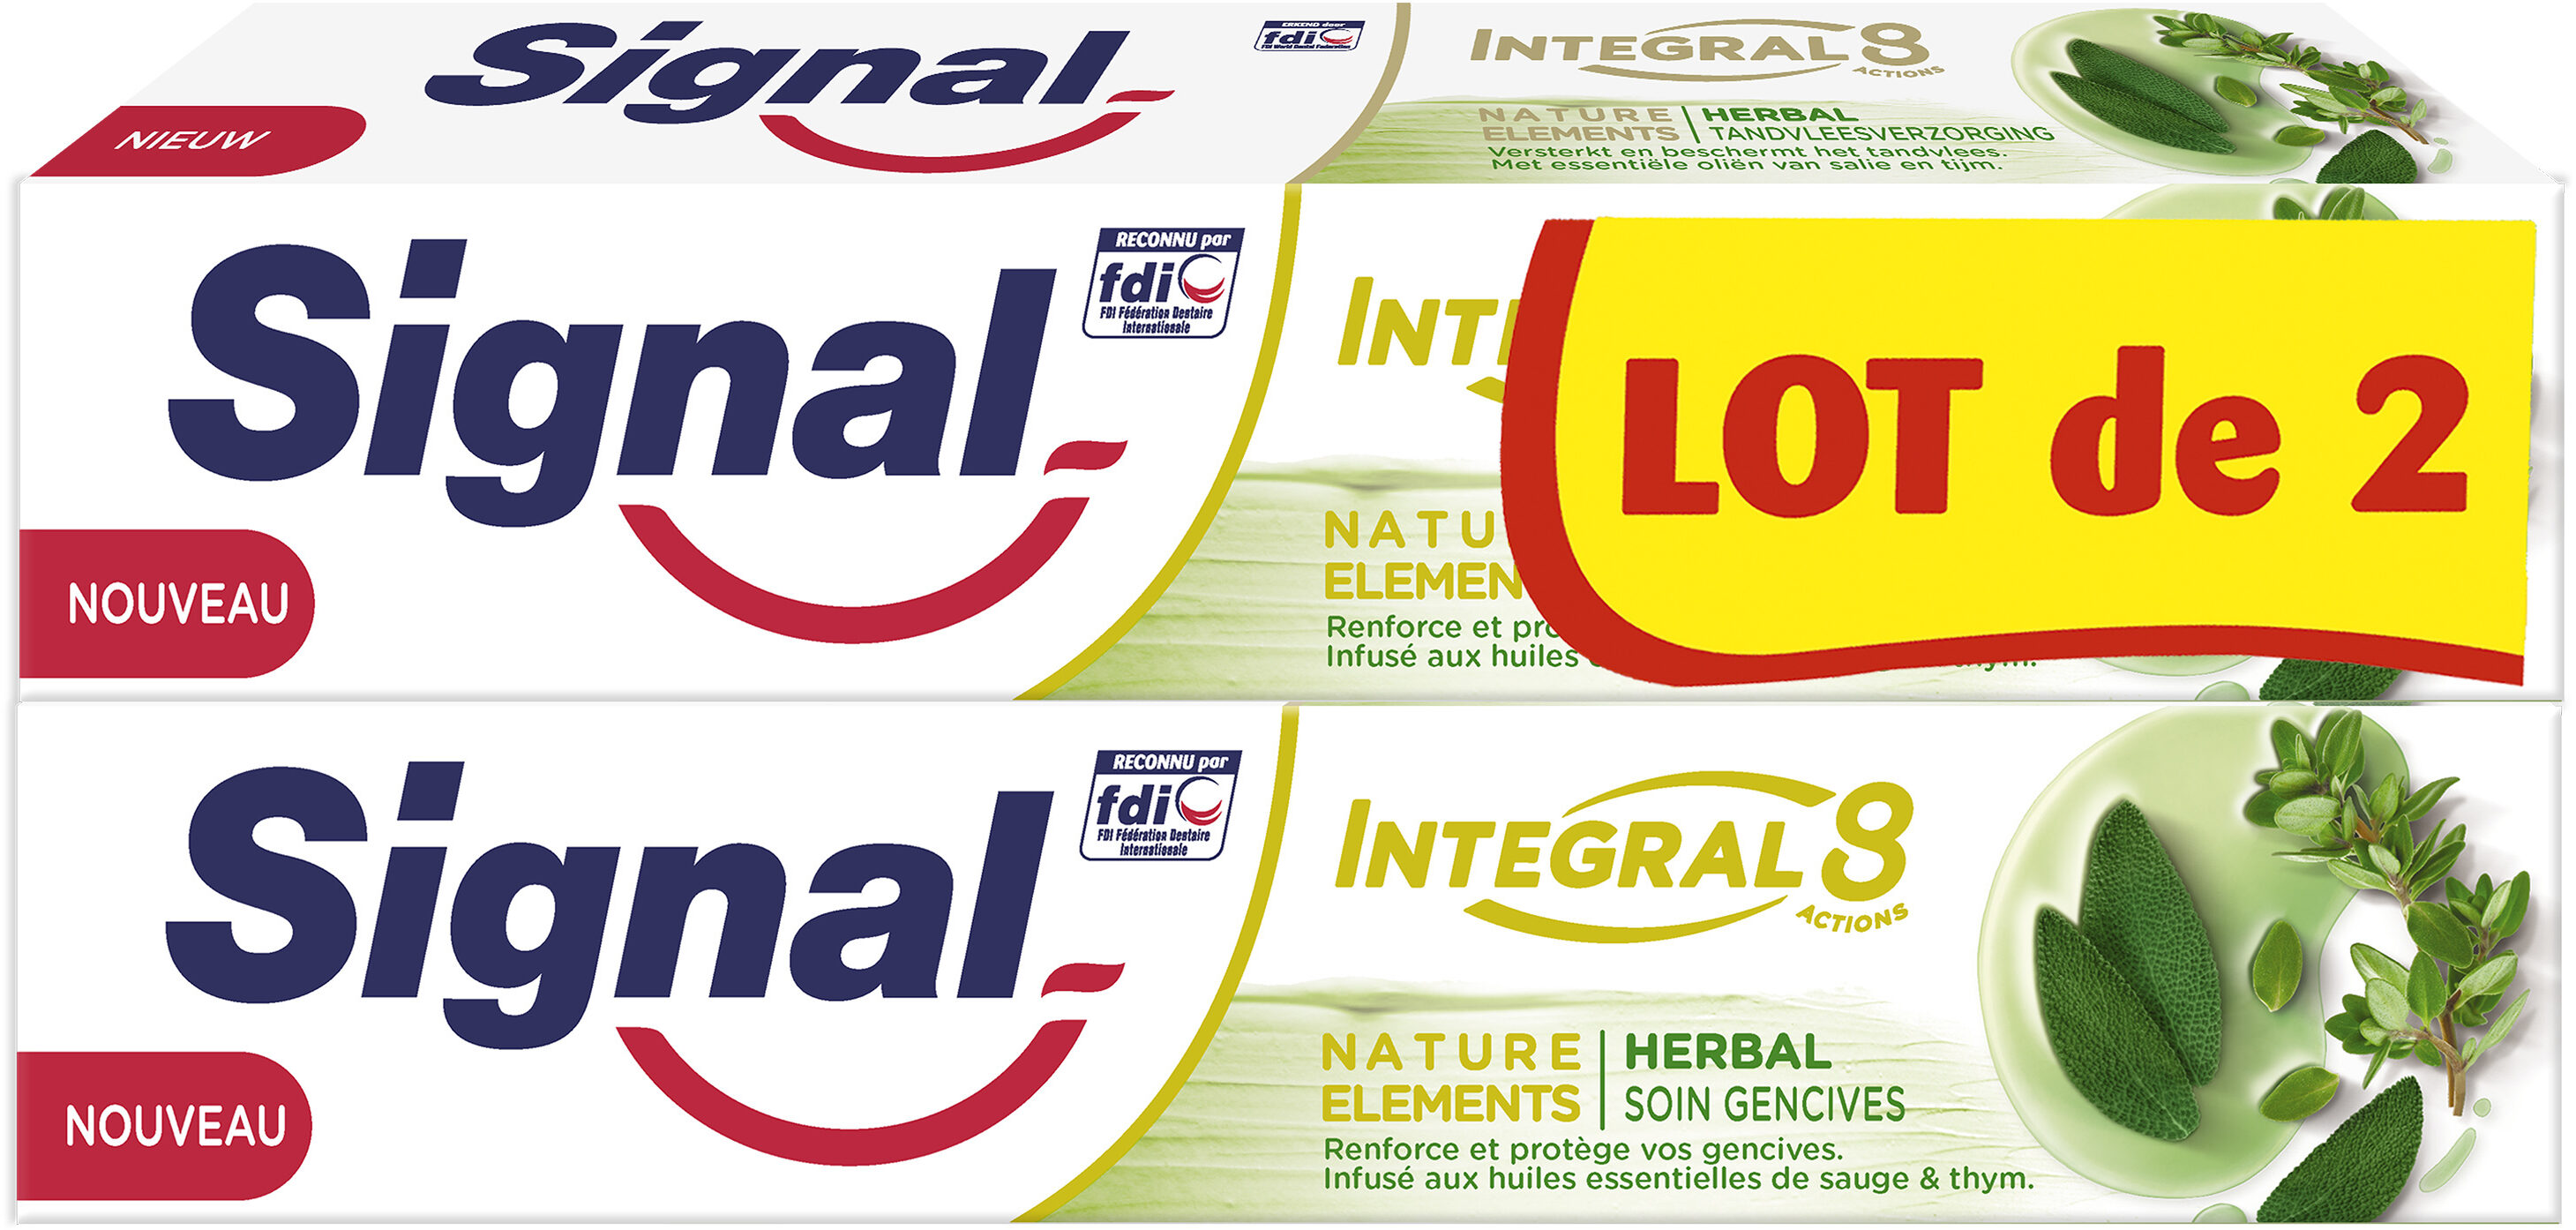 Signal Integral 8 Dentifrice Nature Elements Soin Gencives 2x75ml - Product - fr